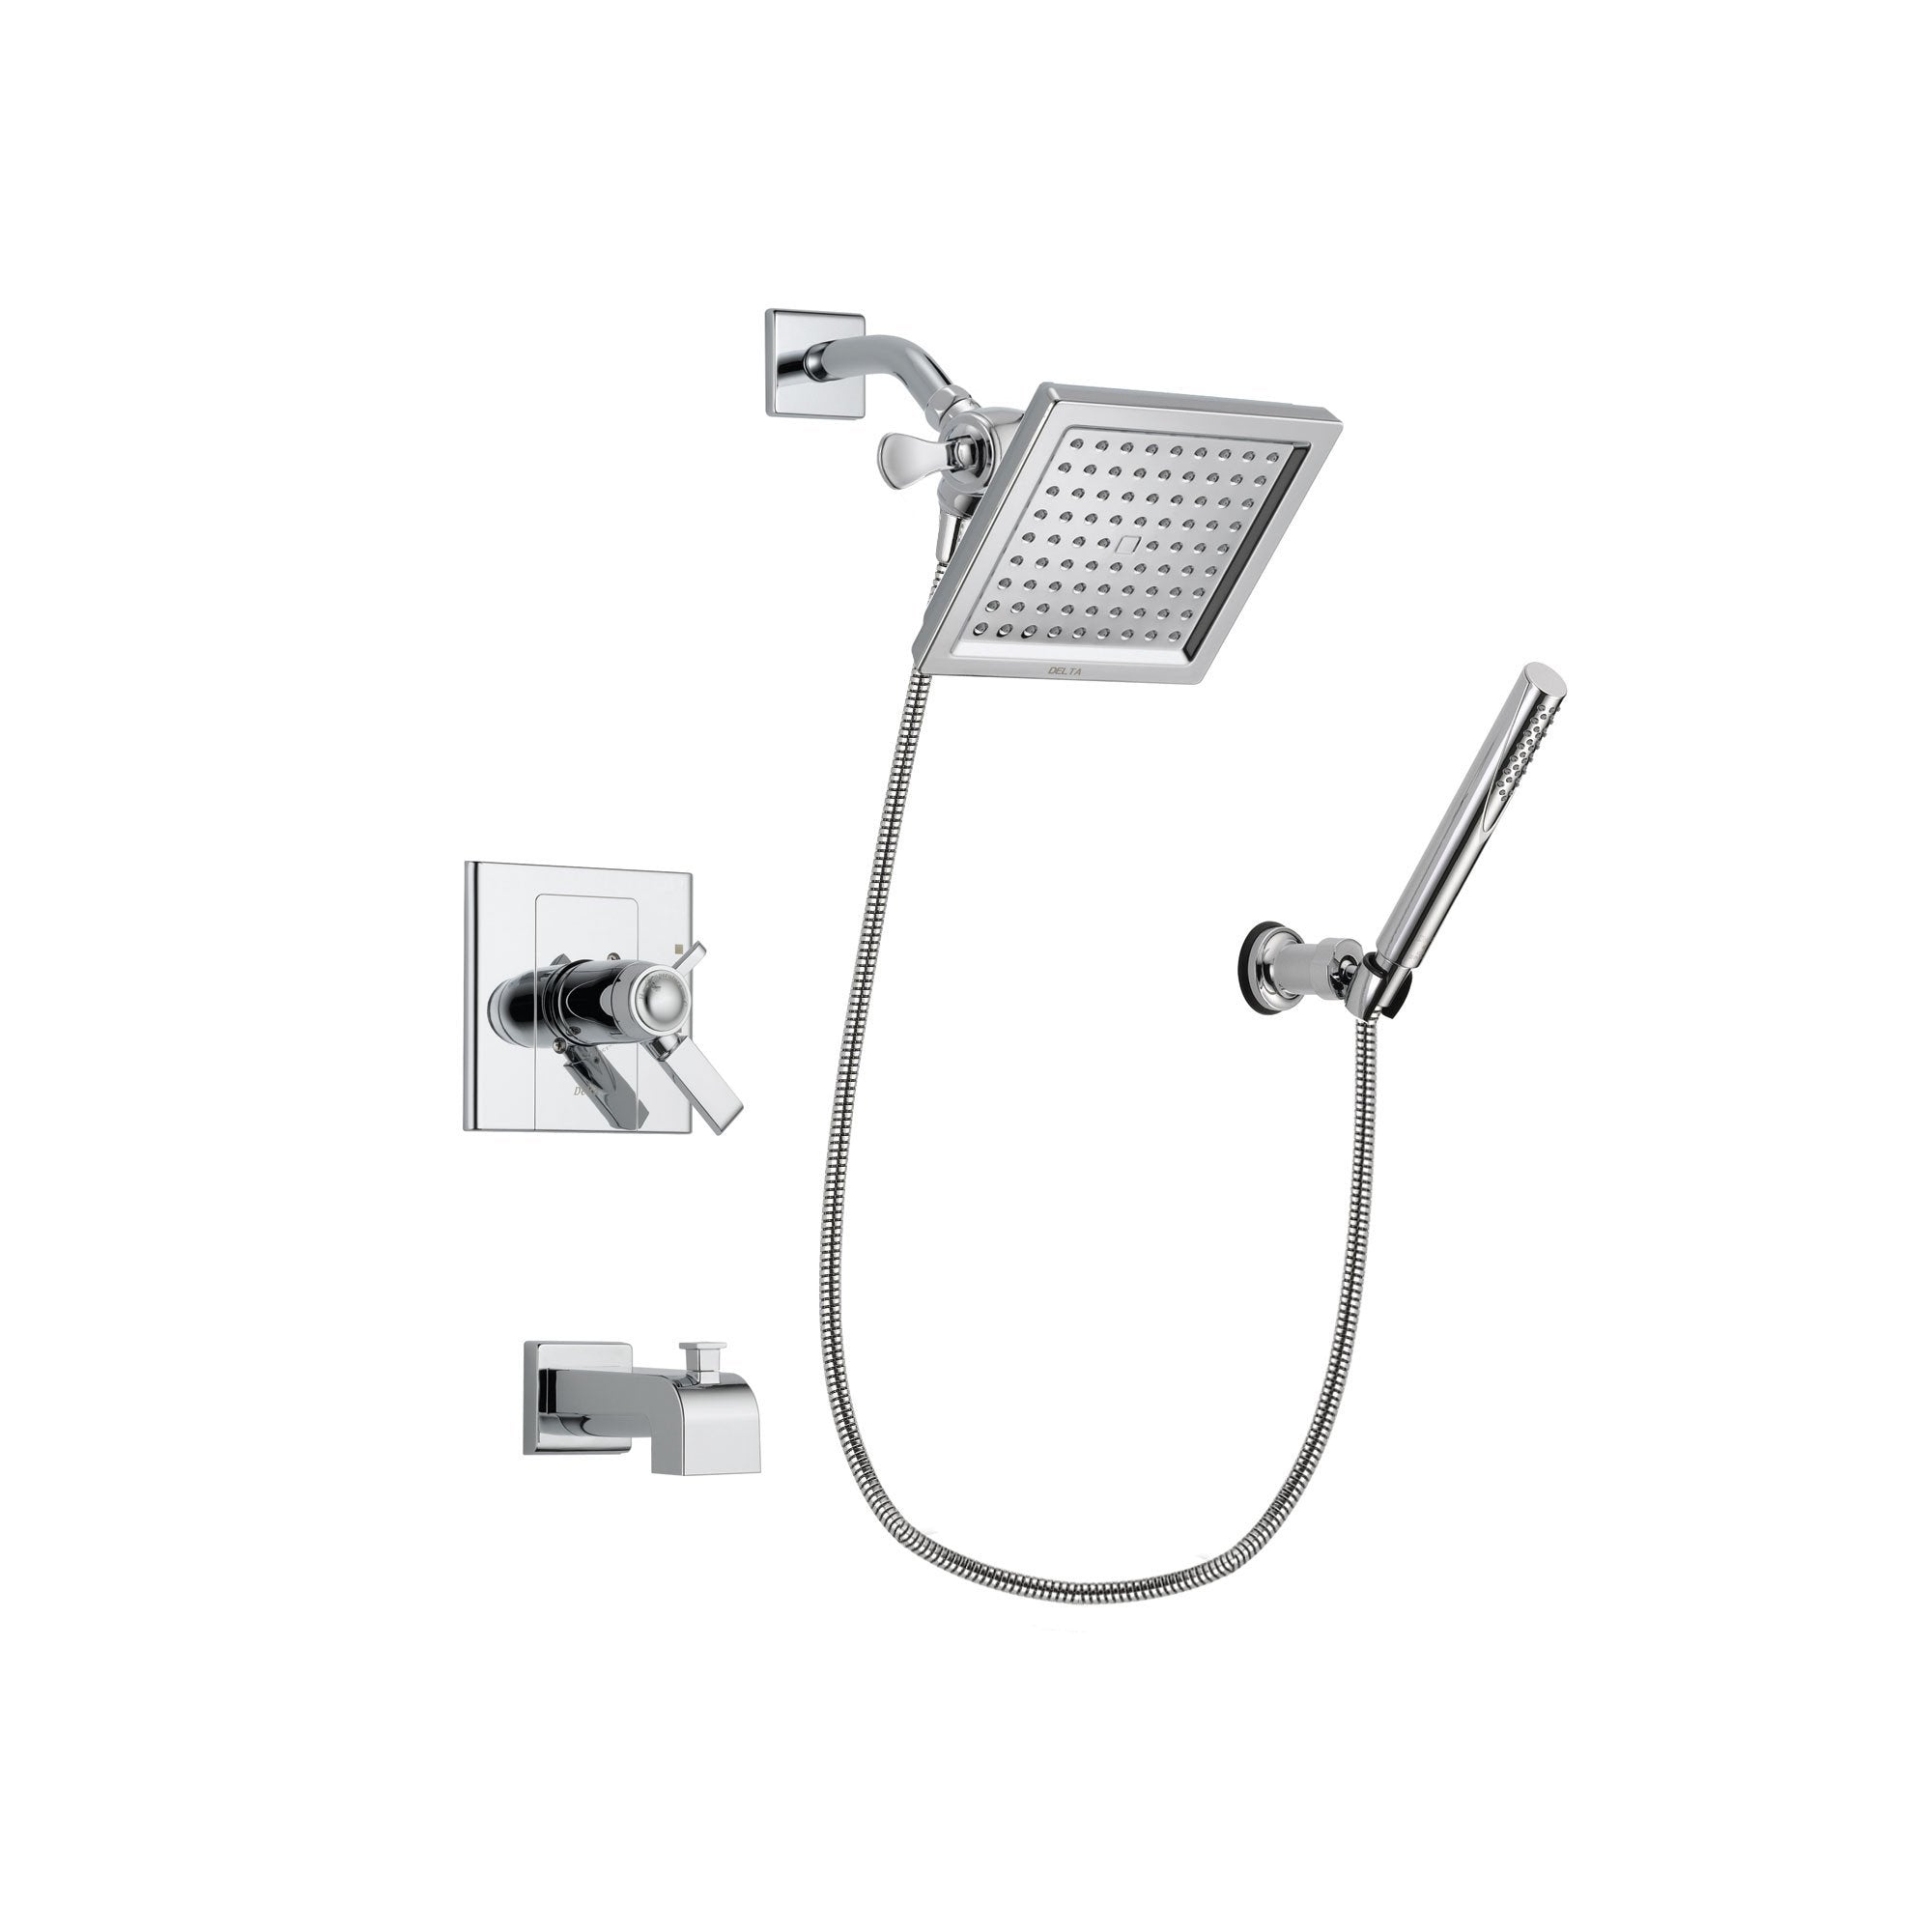 Delta Arzo Chrome Finish Thermostatic Tub and Shower Faucet System Package with 6.5-inch Square Rain Showerhead and Modern Handheld Shower Spray with Wall Bracket and Hose Includes Rough-in Valve and Tub Spout DSP0070V